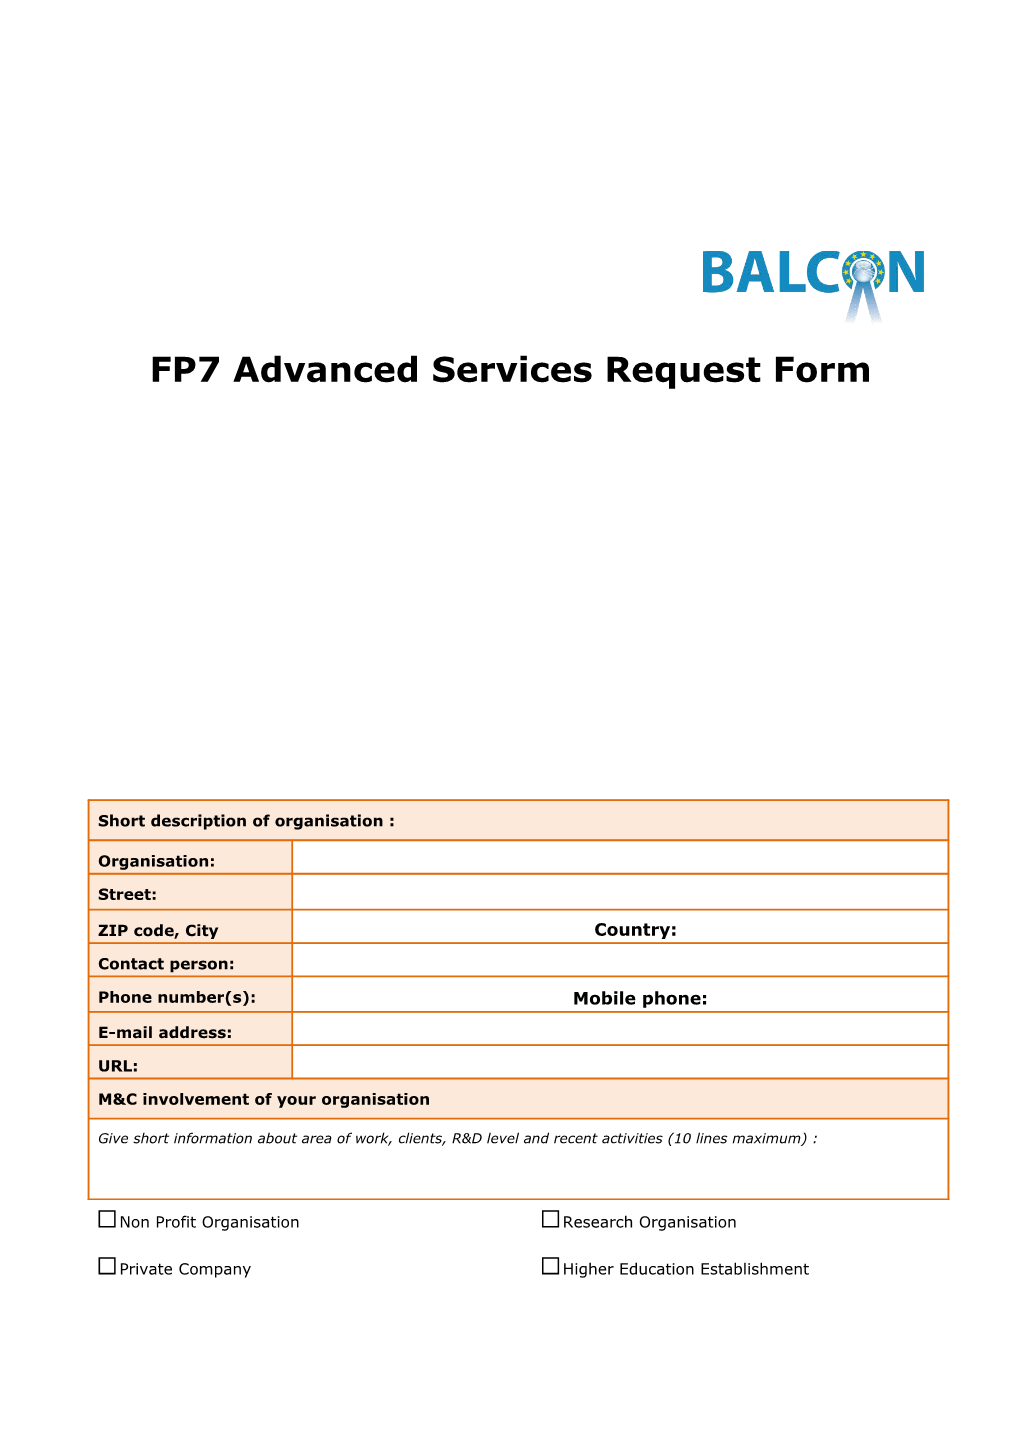 FP7 Advanced Services Request Form